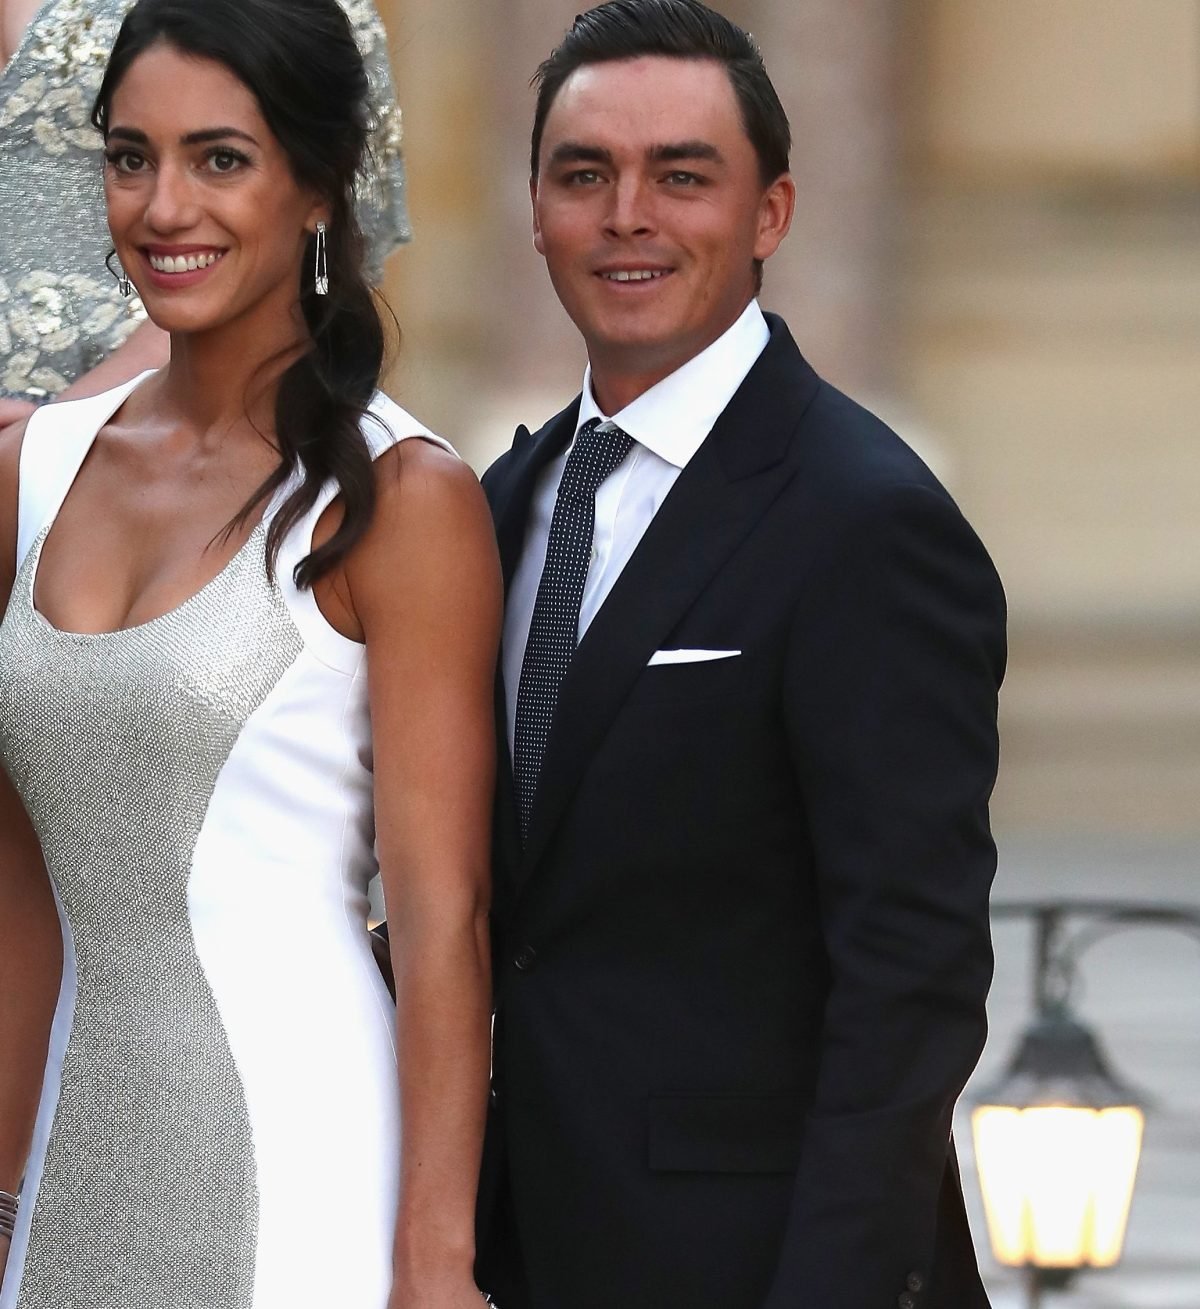 Who's the spouse of golfer Rickie Fowler, Allison Stokke? - Get All the ...